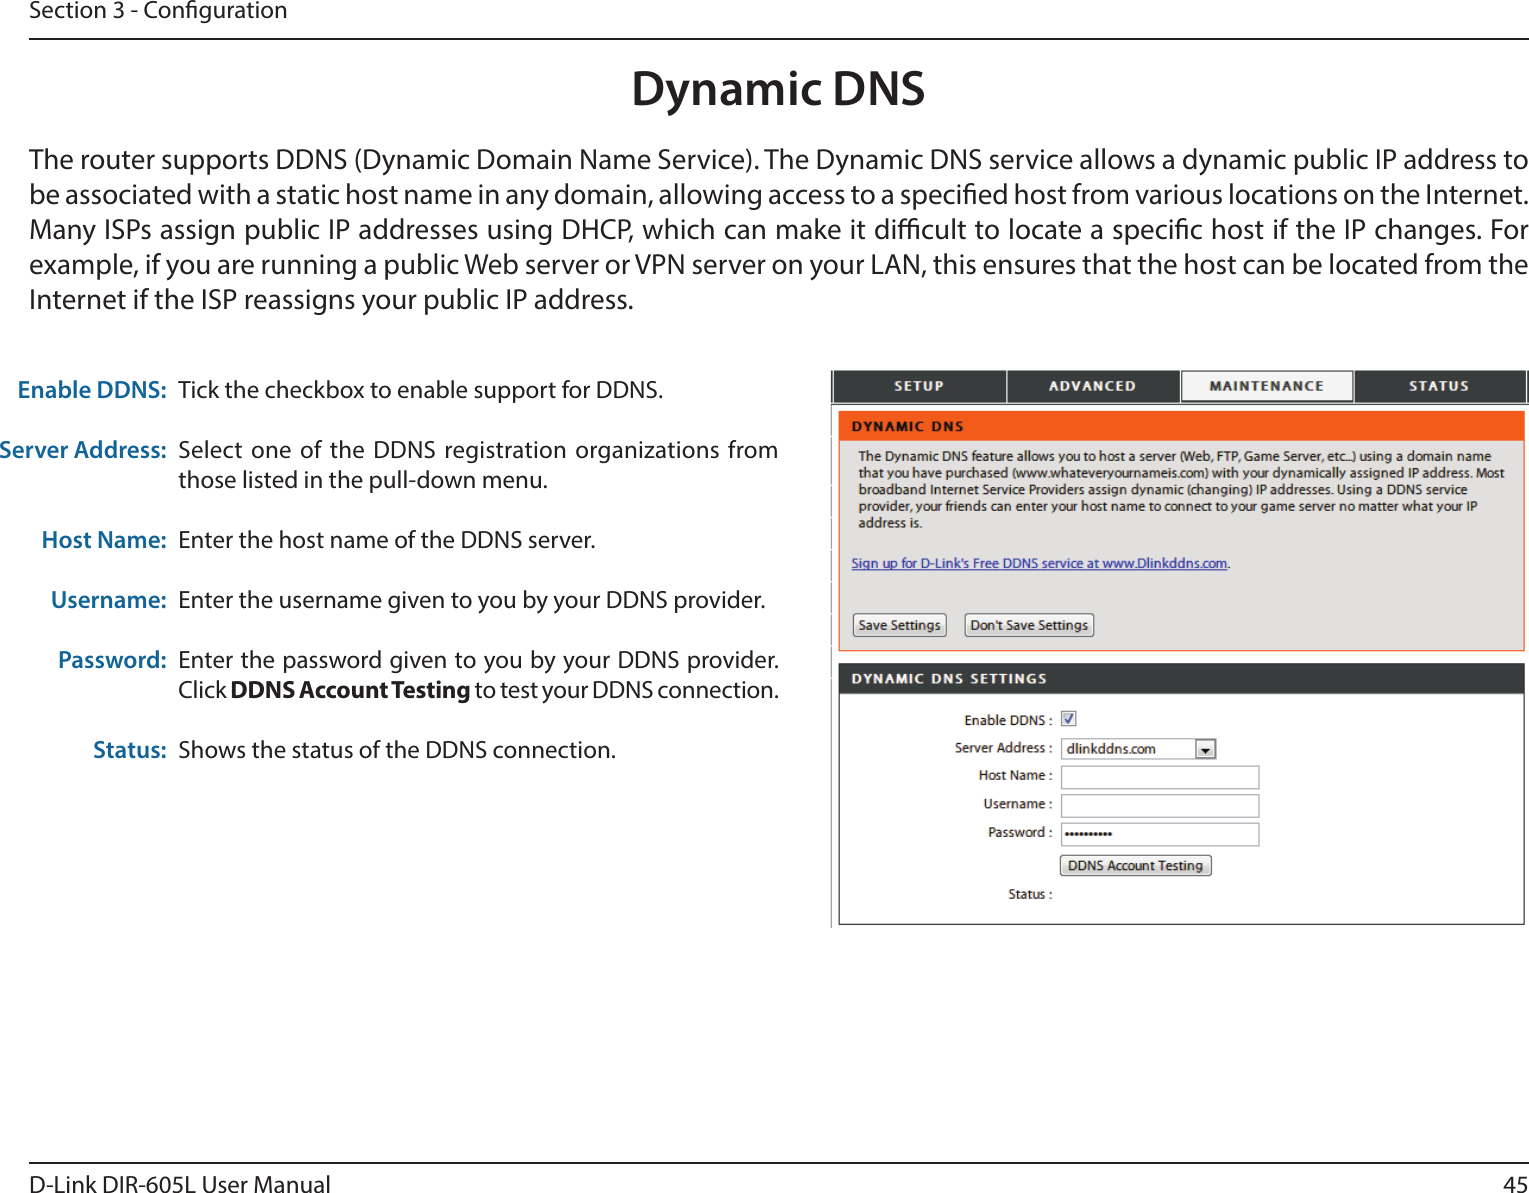 45D-Link DIR-605L User ManualSection 3 - CongurationDynamic DNSTick the checkbox to enable support for DDNS.Select one of the DDNS registration organizations from those listed in the pull-down menu.Enter the host name of the DDNS server.Enter the username given to you by your DDNS provider.Enter the password given to you by your DDNS provider. Click DDNS Account Testing to test your DDNS connection.Shows the status of the DDNS connection.Enable DDNS:Server Address:Host Name:Username:Password:Status:The router supports DDNS (Dynamic Domain Name Service). The Dynamic DNS service allows a dynamic public IP address to be associated with a static host name in any domain, allowing access to a specied host from various locations on the Internet. Many ISPs assign public IP addresses using DHCP, which can make it dicult to locate a specic host if the IP changes. For example, if you are running a public Web server or VPN server on your LAN, this ensures that the host can be located from the Internet if the ISP reassigns your public IP address.